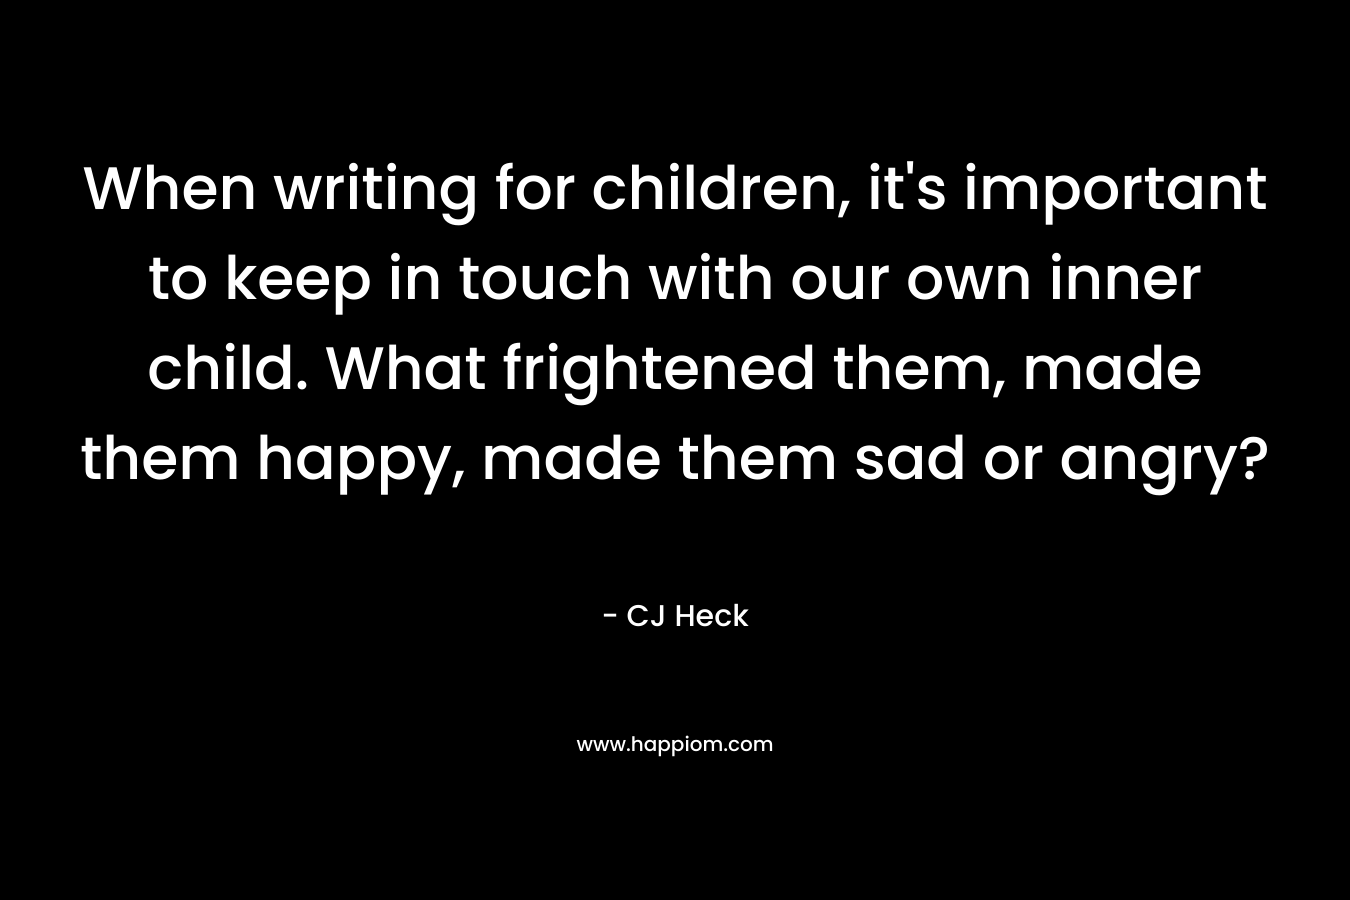 When writing for children, it's important to keep in touch with our own inner child. What frightened them, made them happy, made them sad or angry?